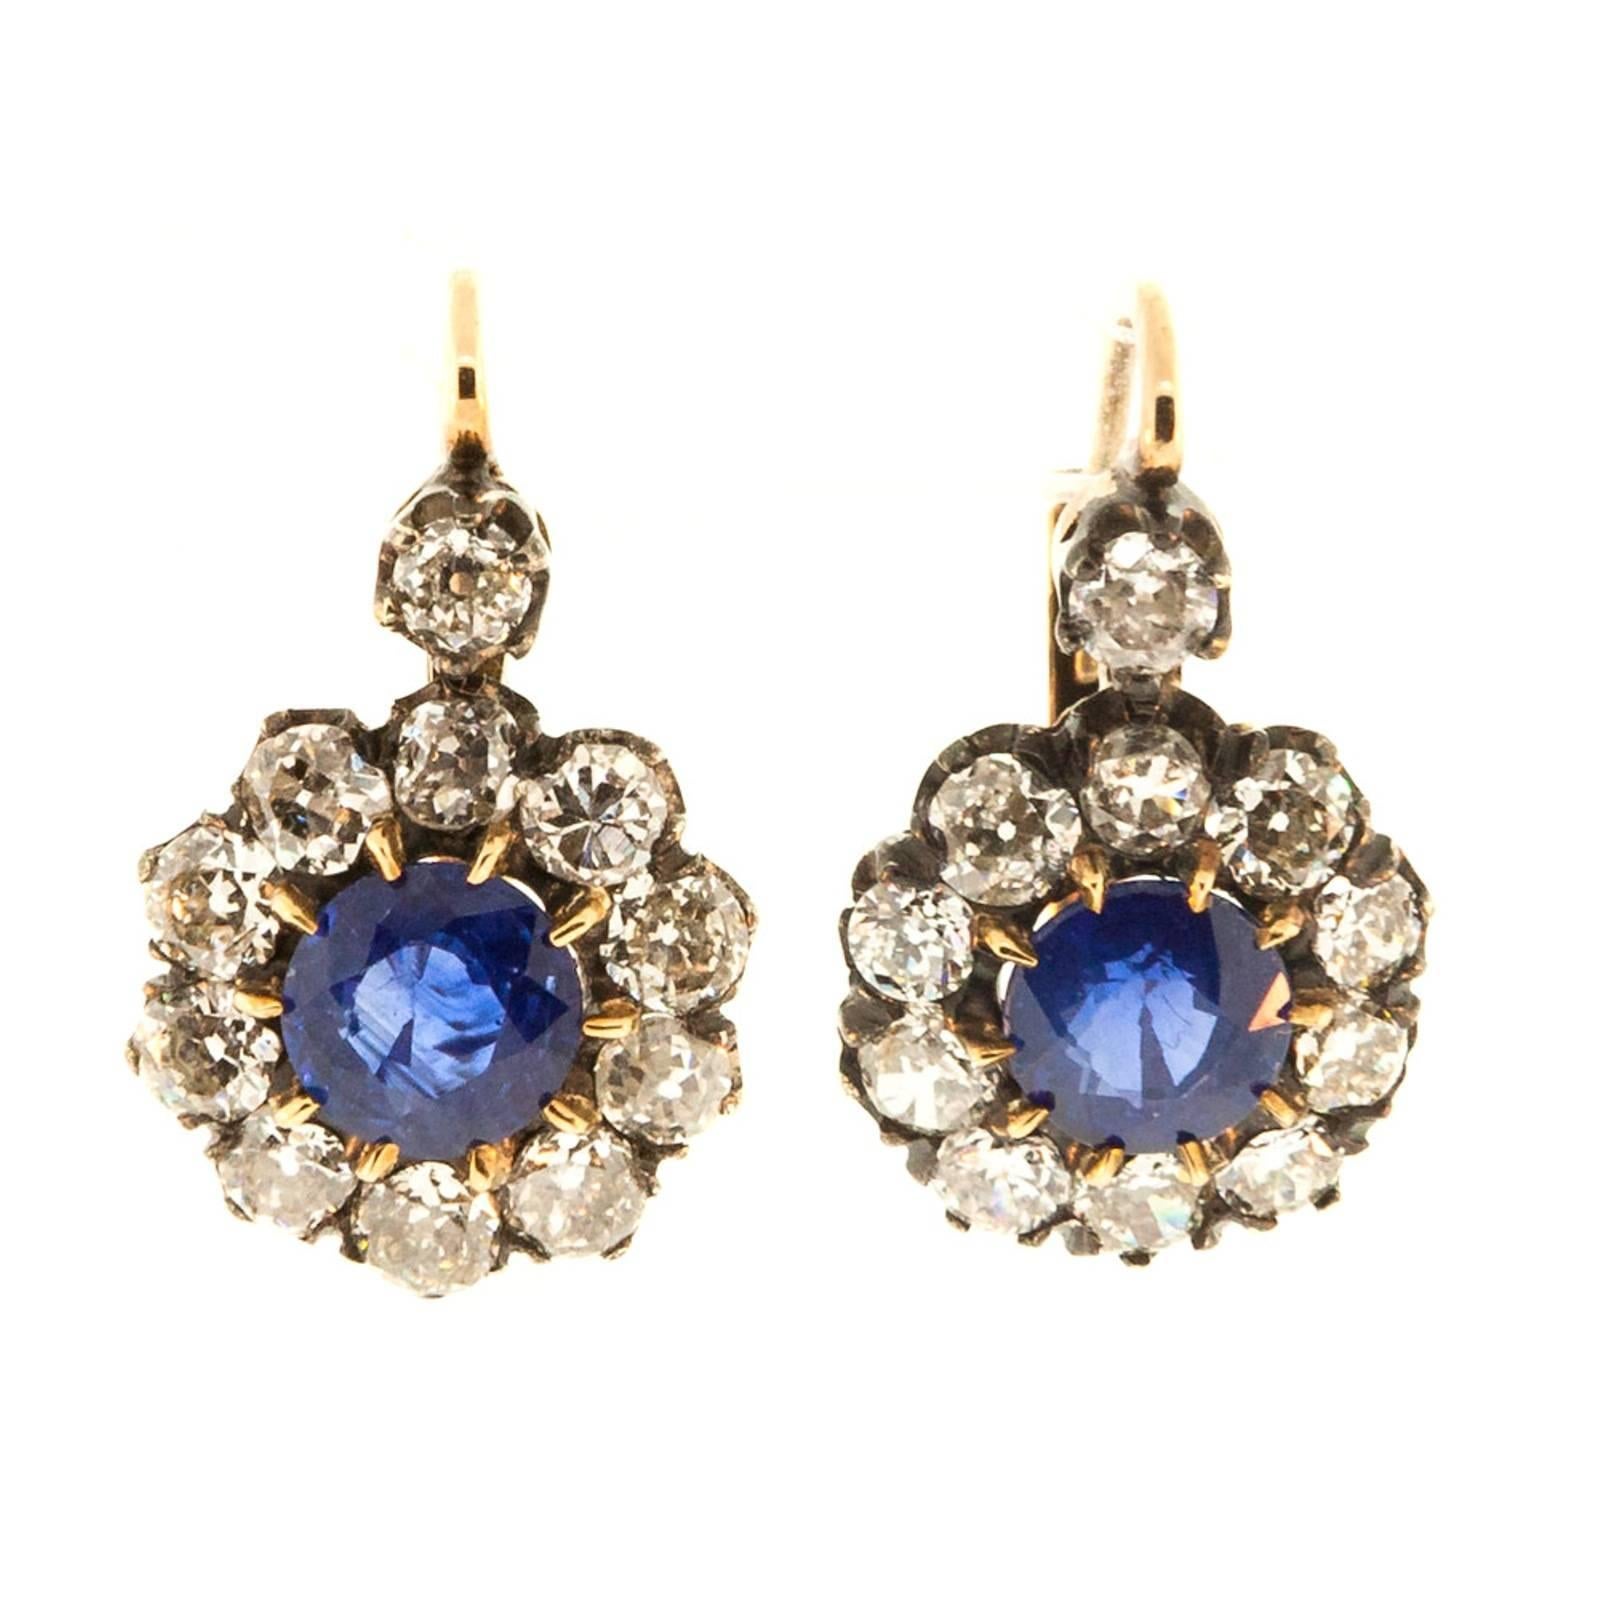 Old Cut Diamond and Sapphire Cluster Earrings